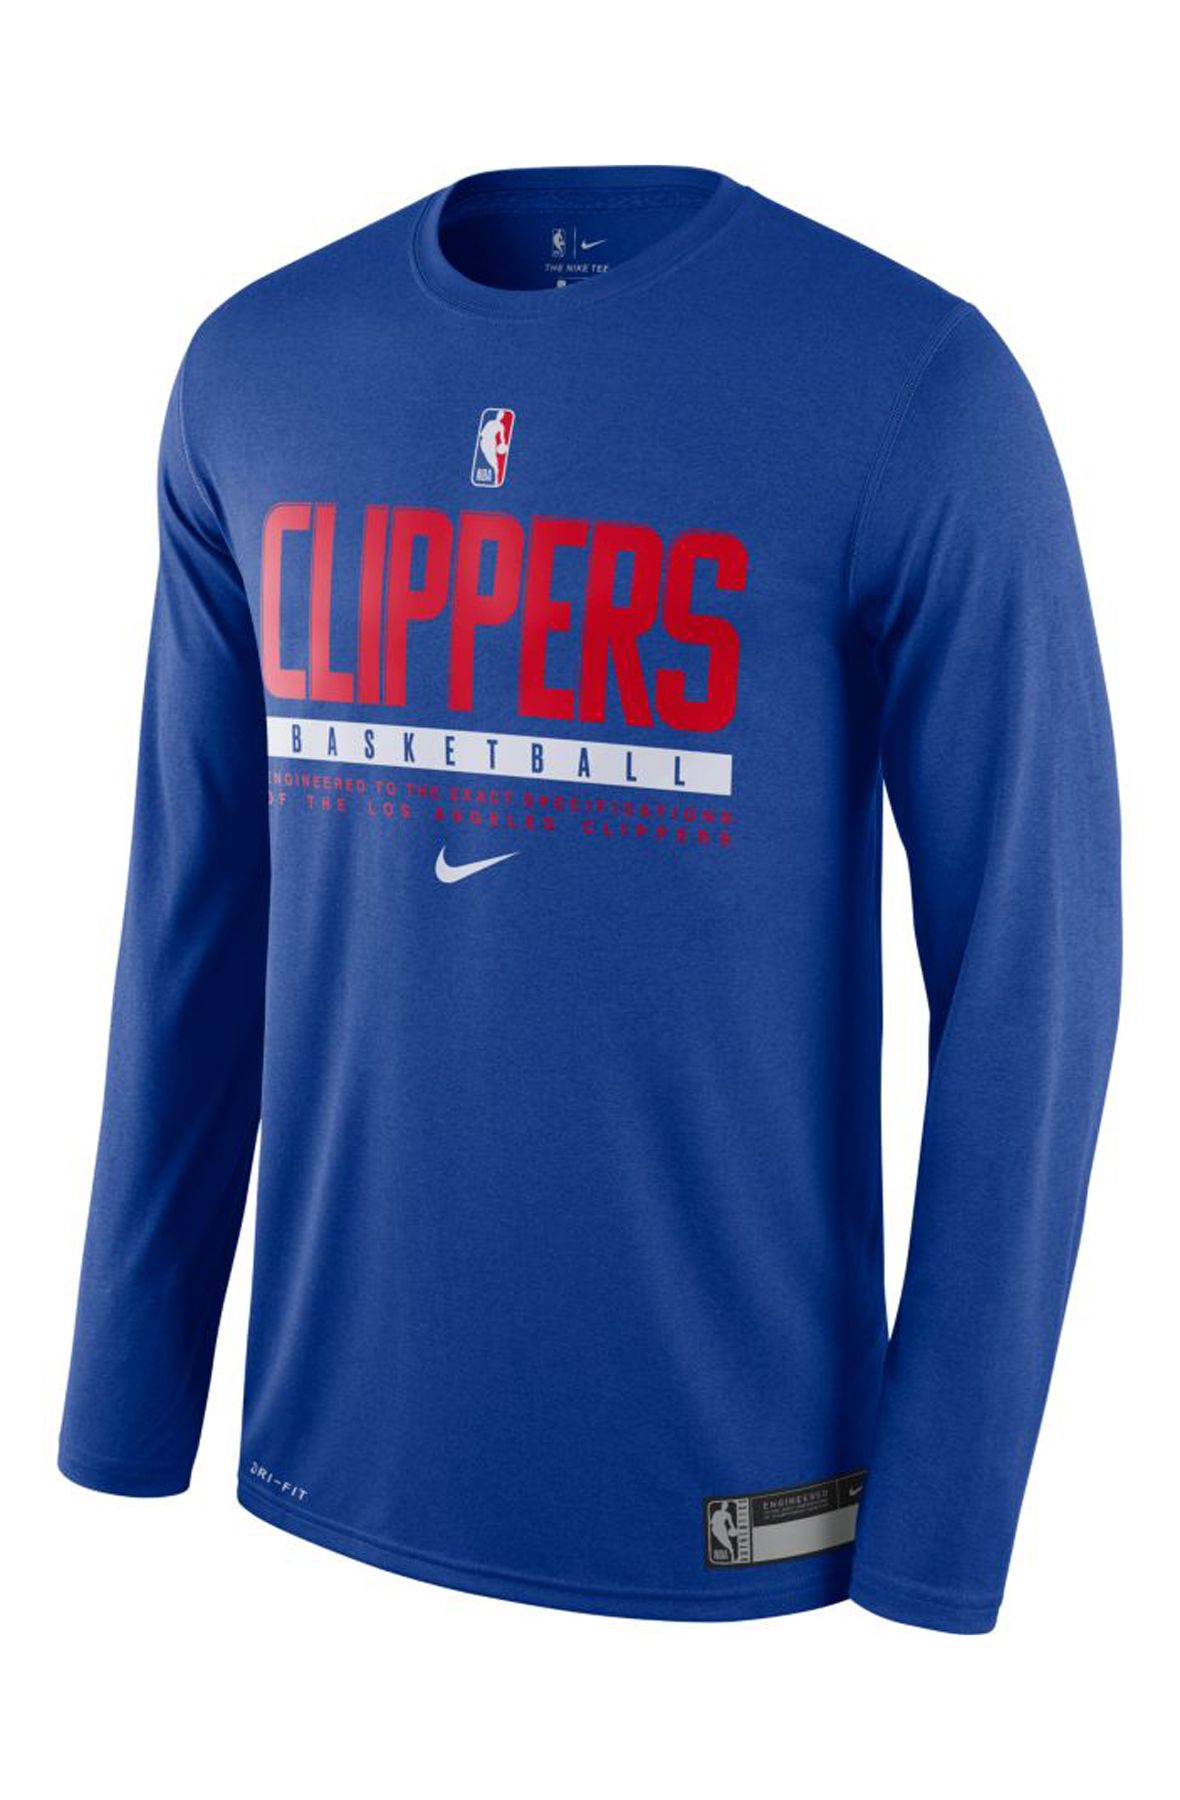 NIKE NBA LOS ANGELES CLIPPERS ICON EDITION SWINGMAN JERSEY RUSH